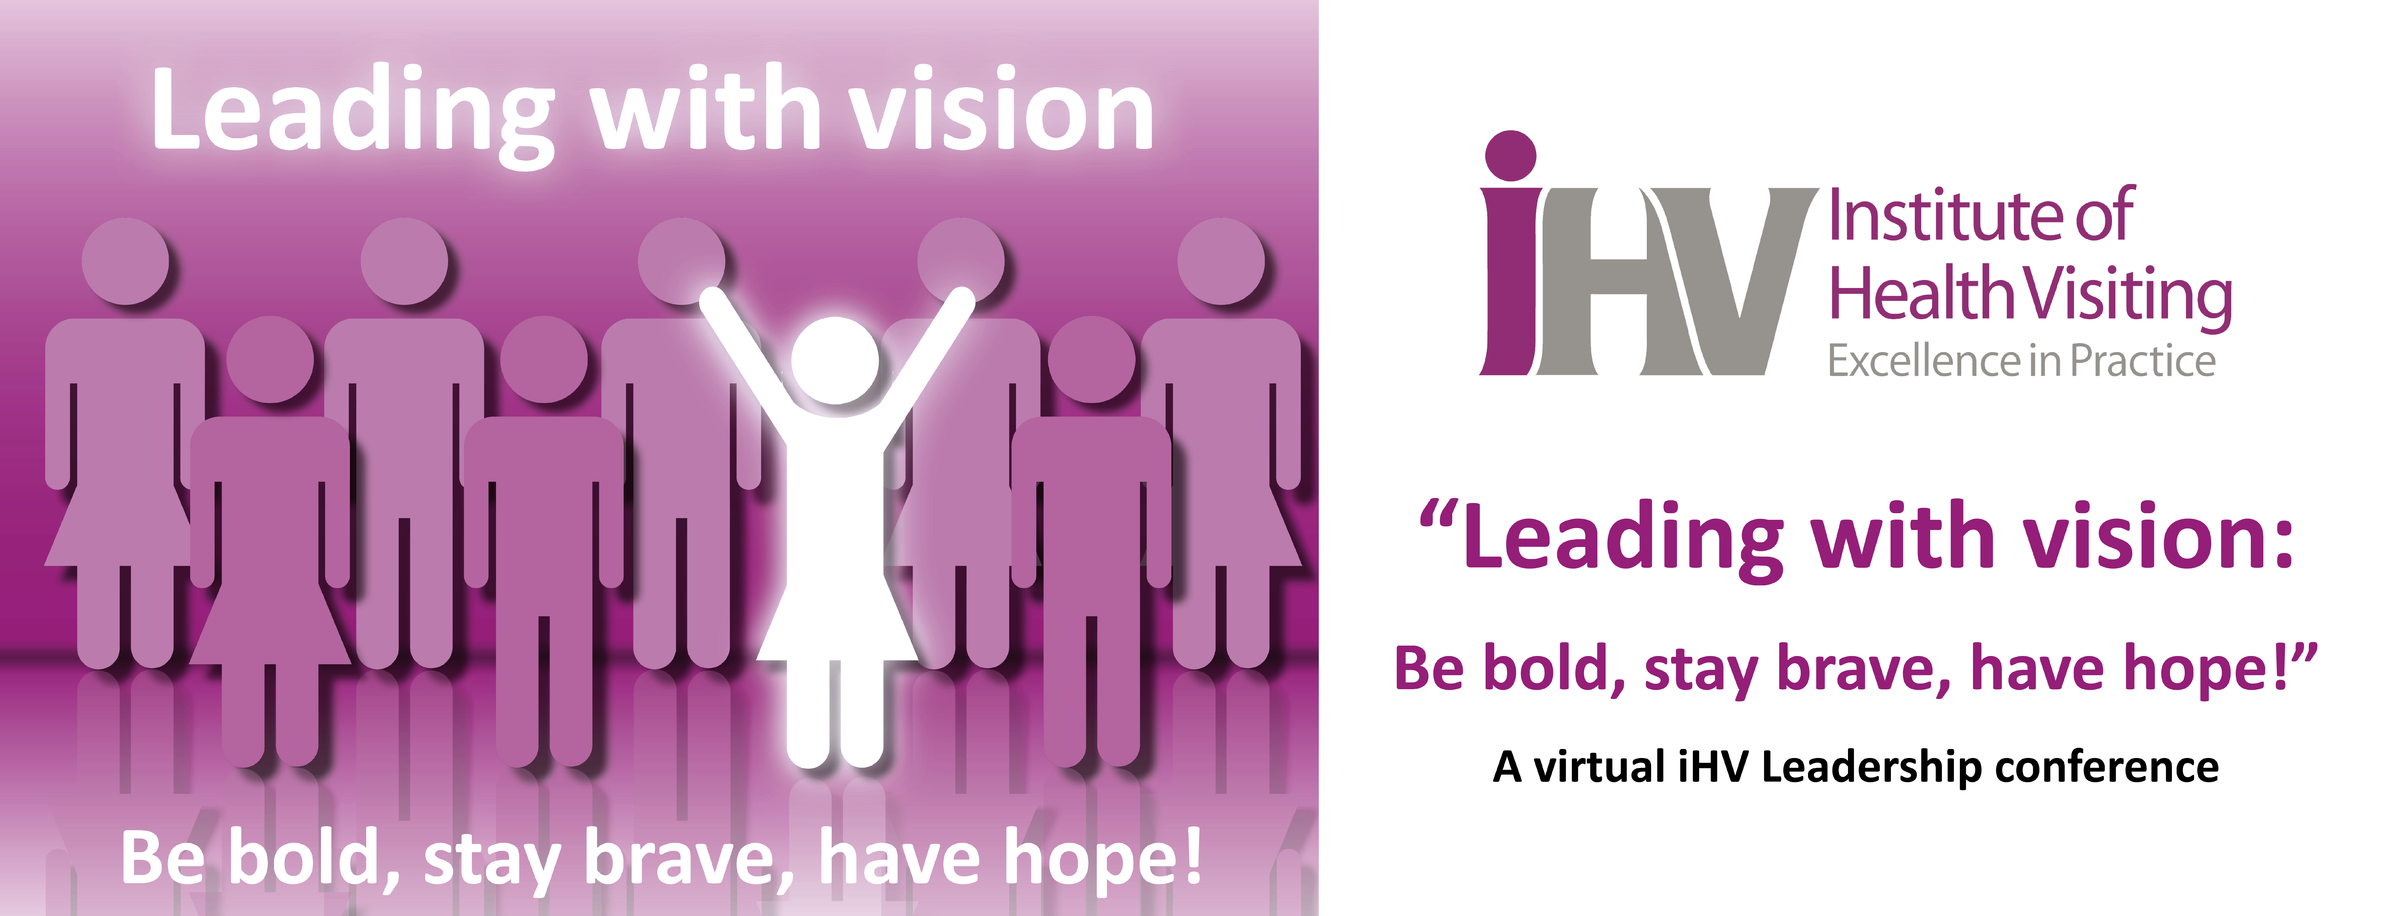 iHV Leadership conference: Leading with Vision- be bold, stay brave, have hope!